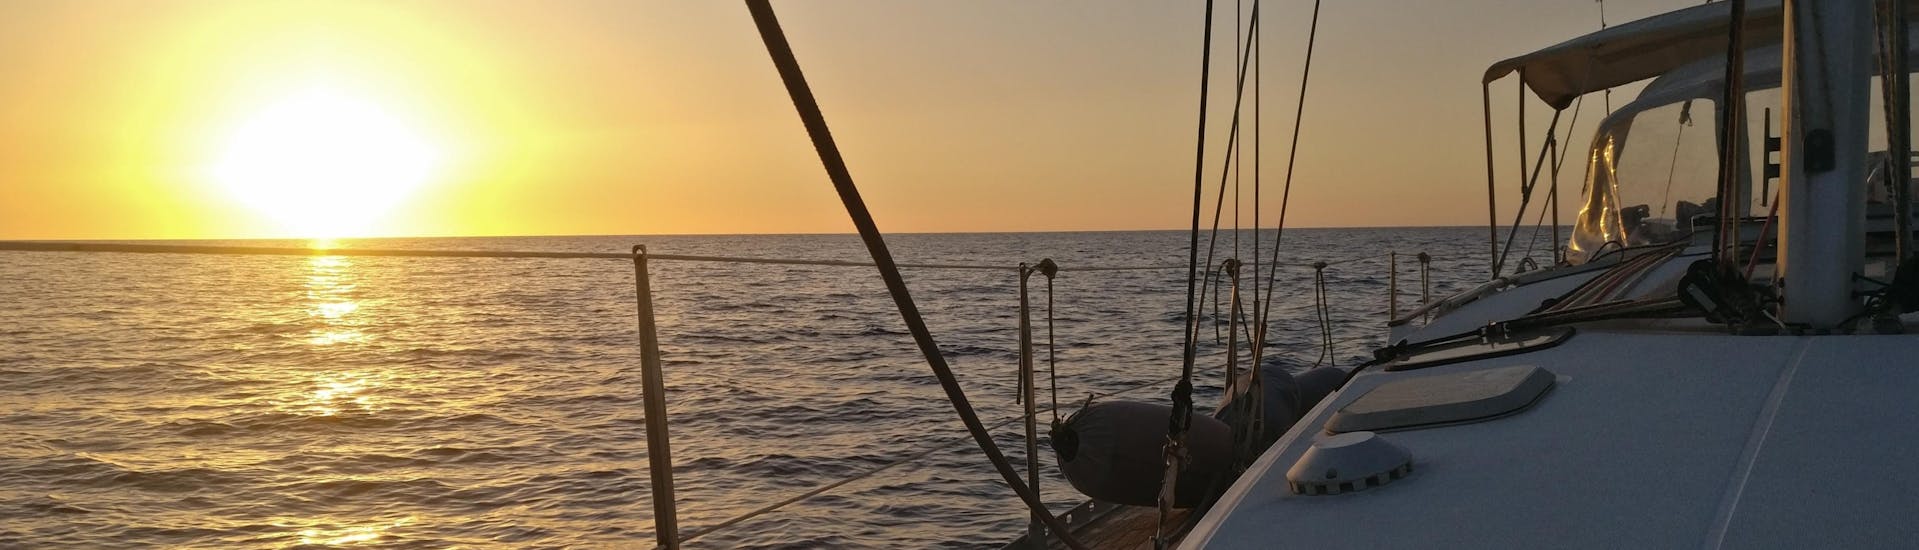 View of the sea at sunset from a boat from Quarantesimo Parallelo Leuca.